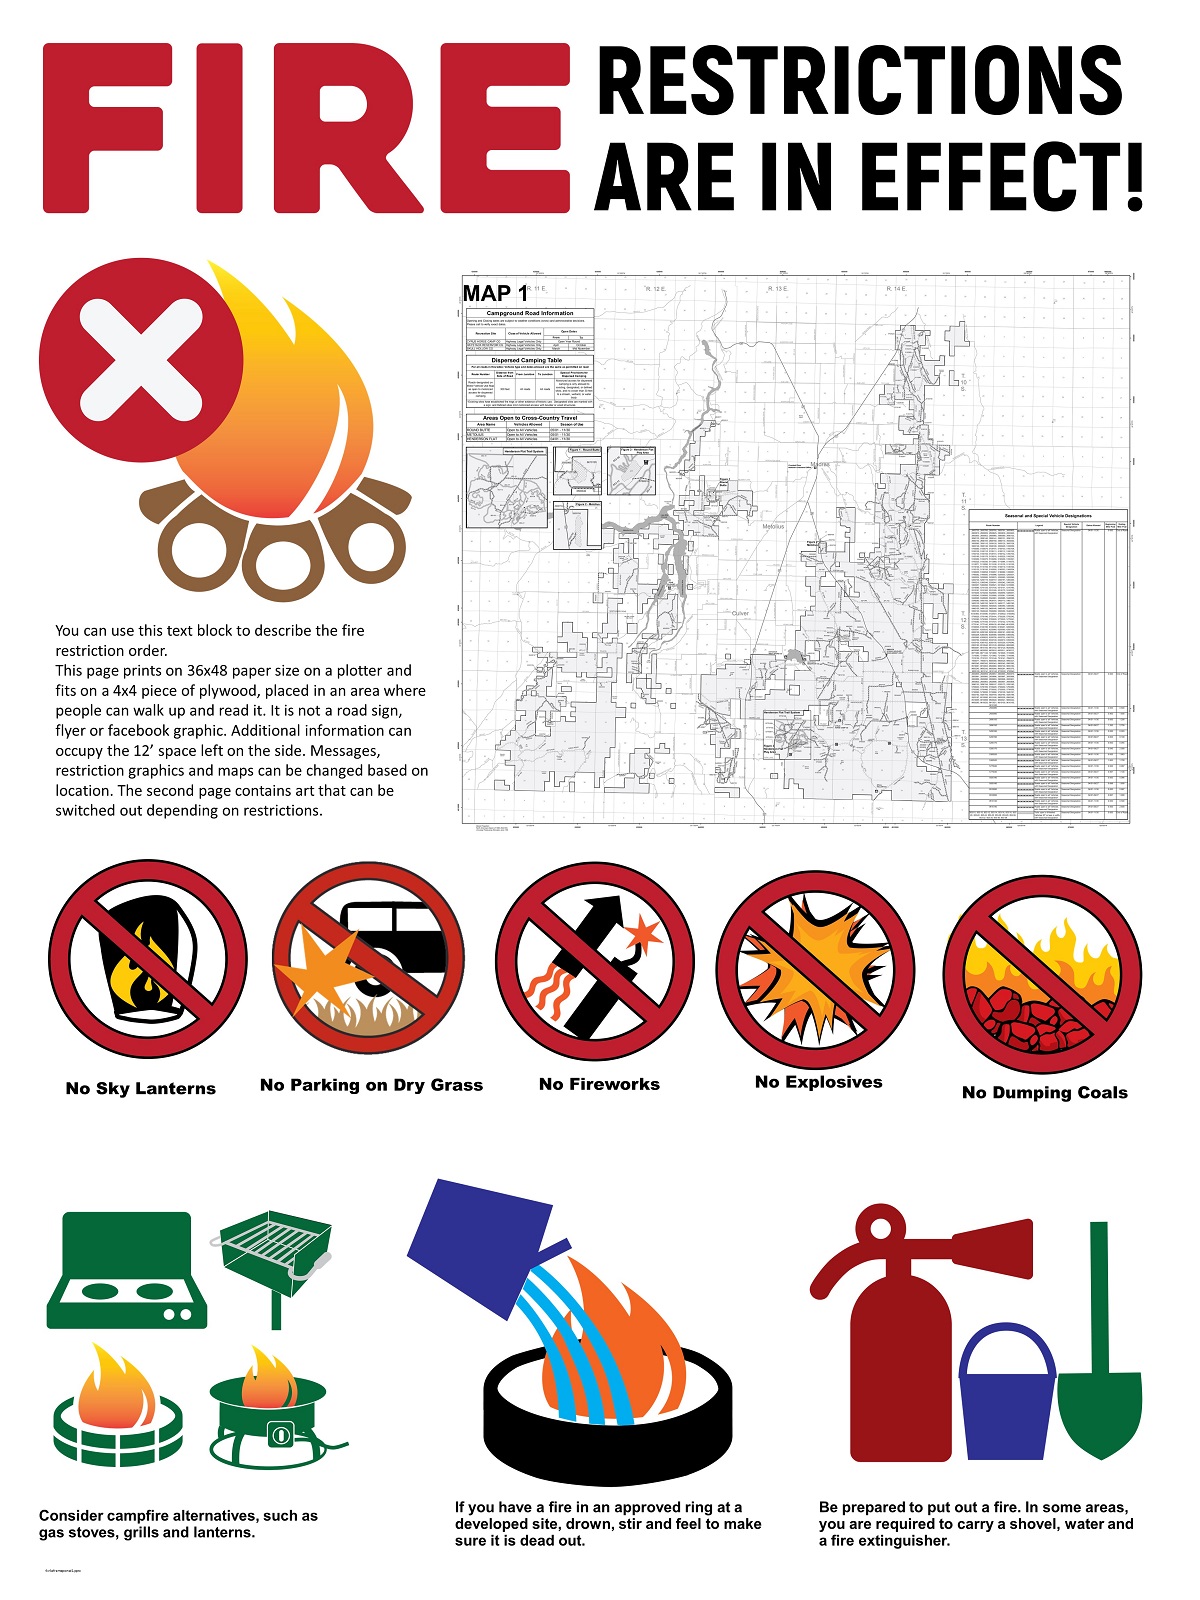 Fire restrictions are in effect with prohibited symbols and campfire alternatives